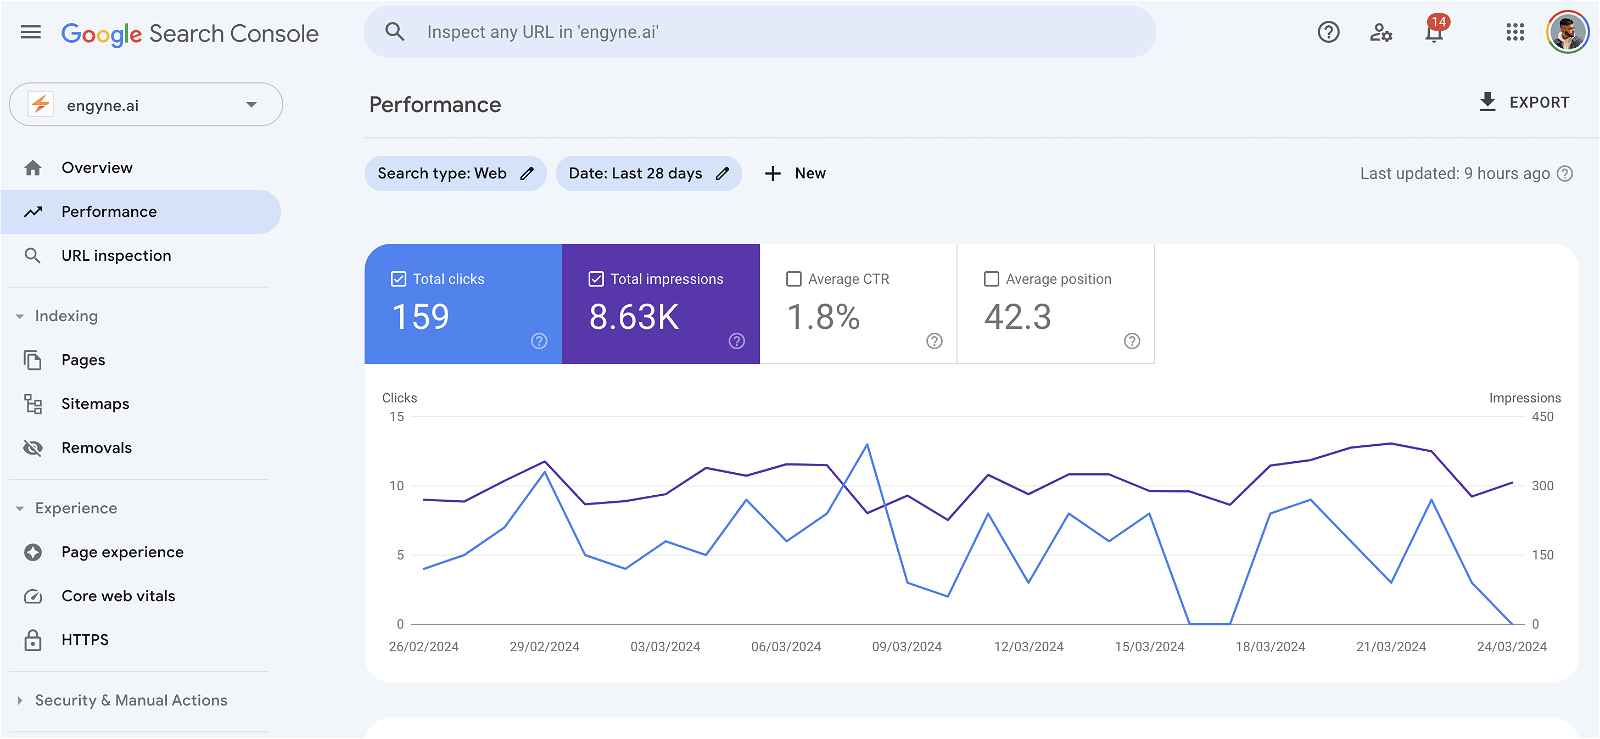 Engyne's Google Search Console dashboard